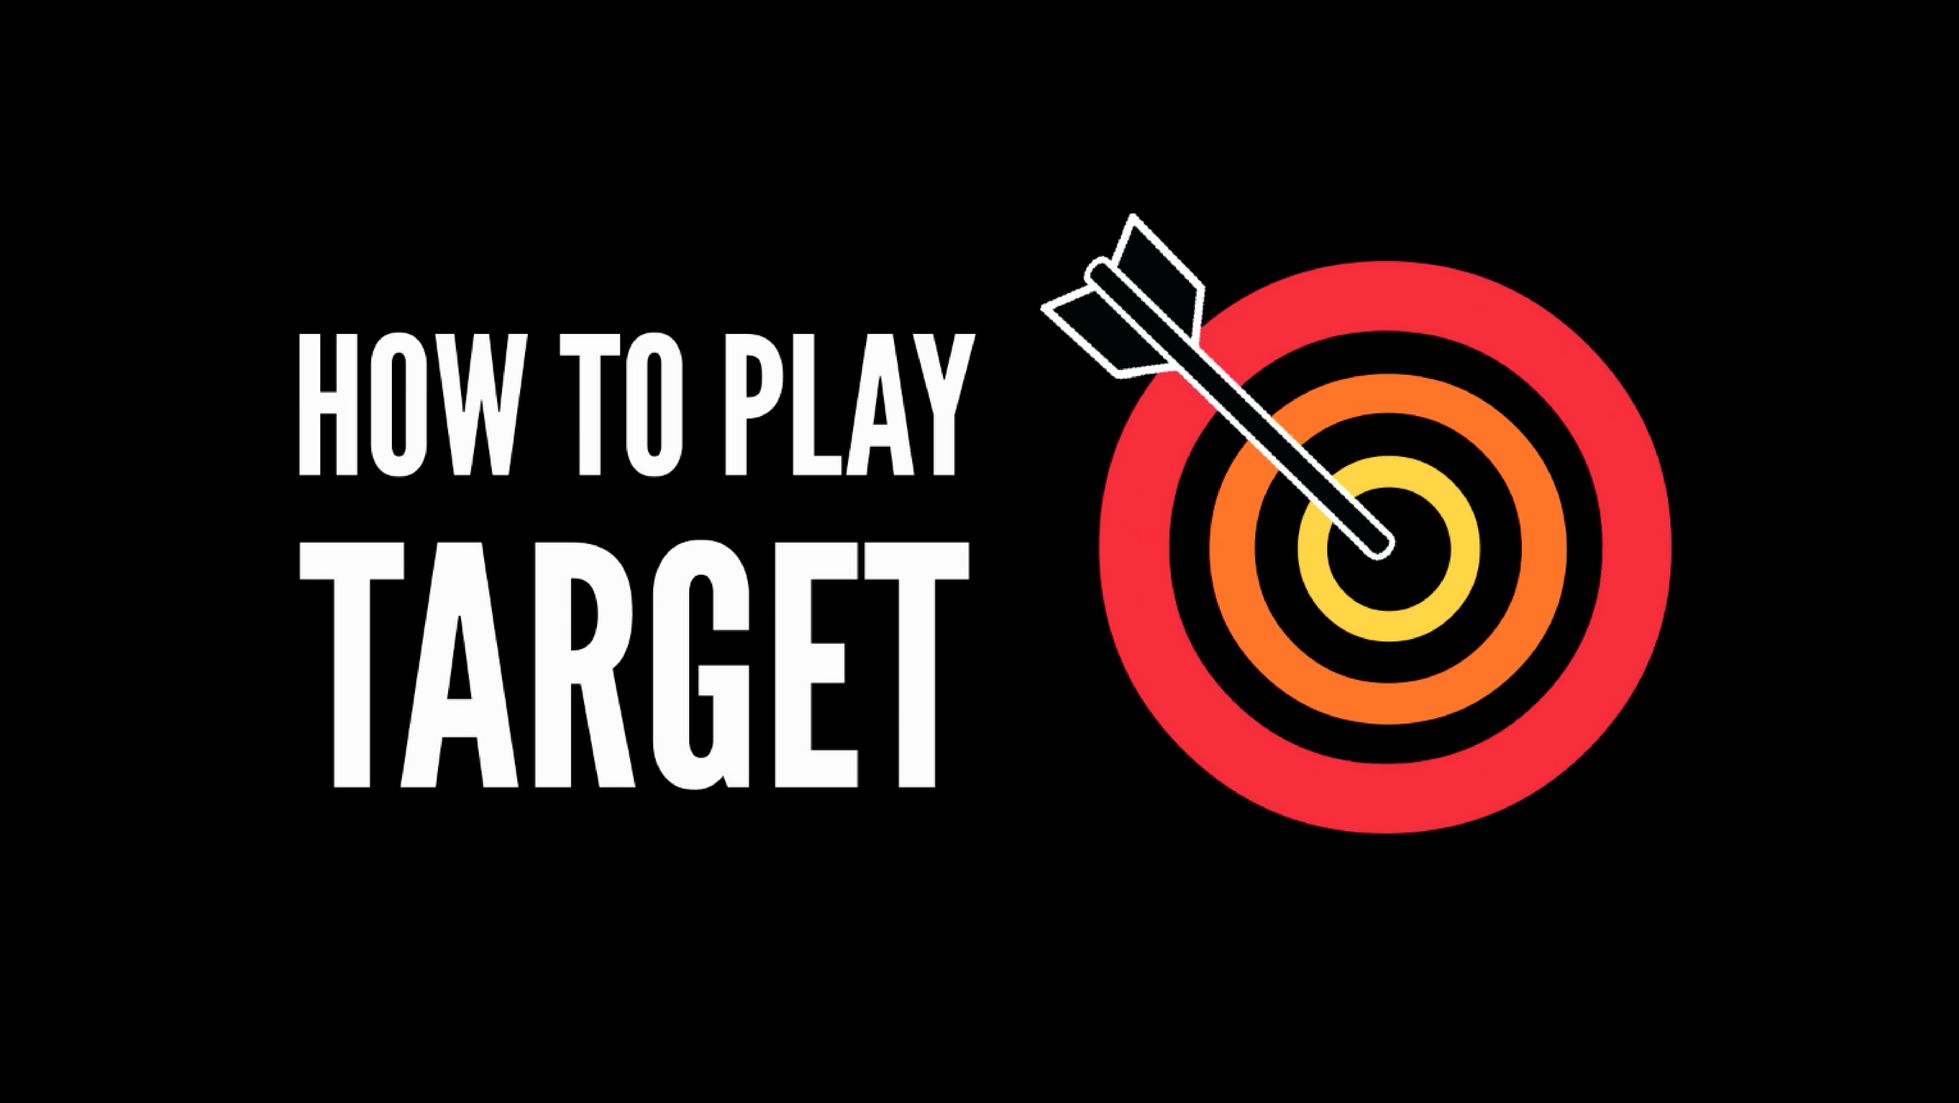 How to Play Target